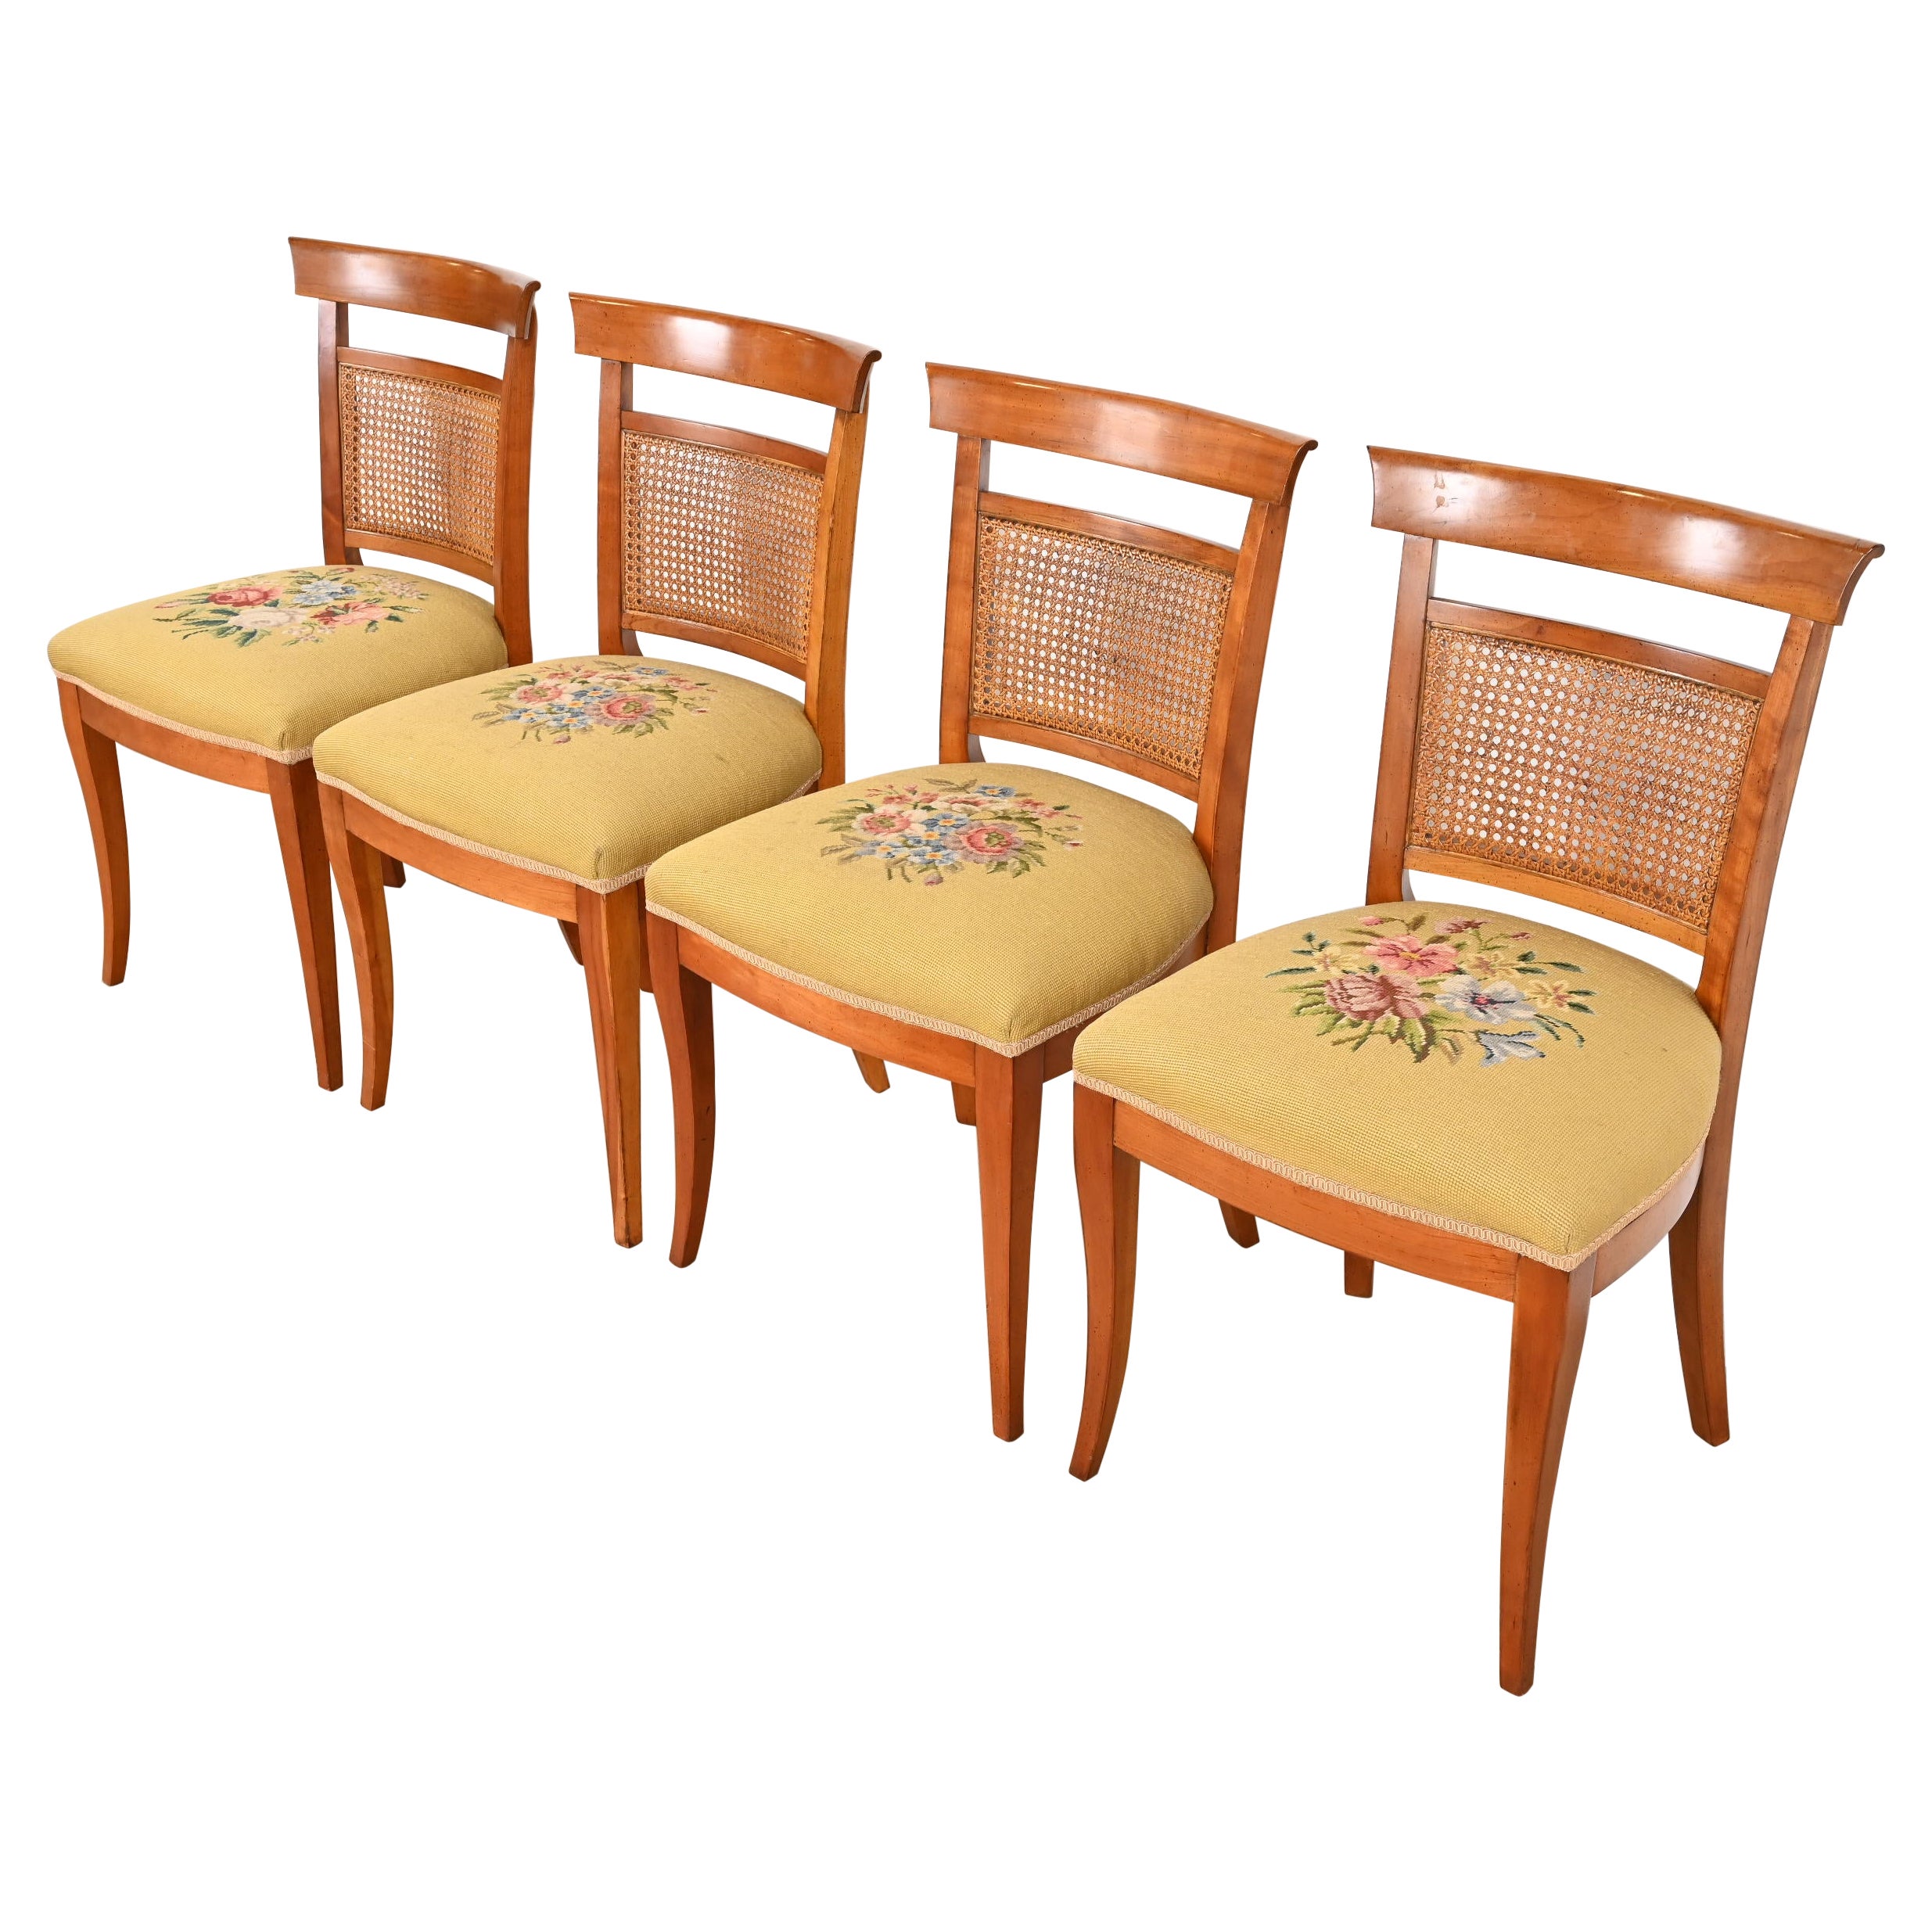 Kindel Furniture French Regency Cherry Wood and Cane Dining Chairs, Set of Four For Sale